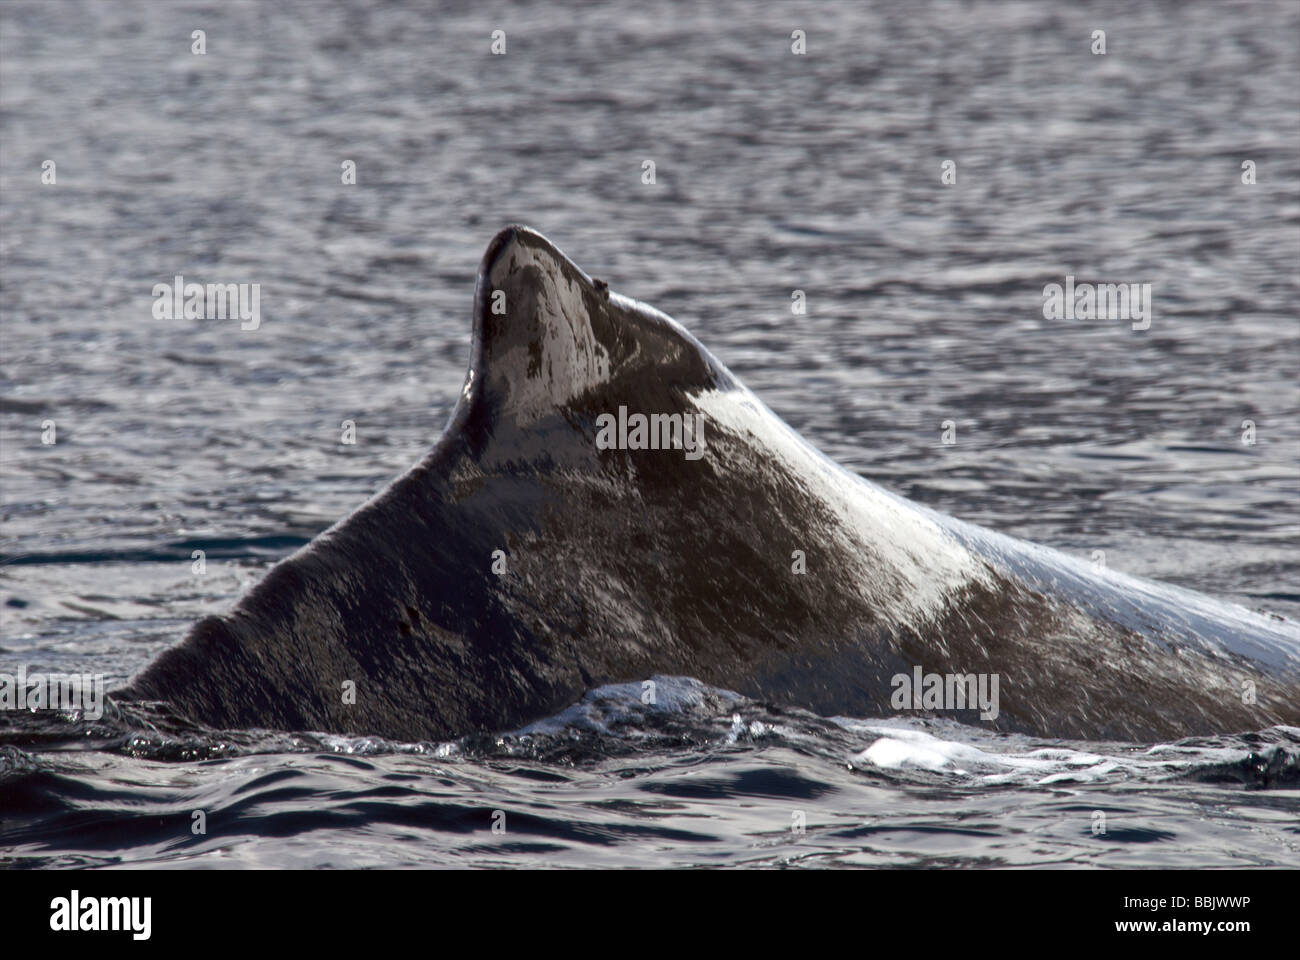 'Hump' of a Humpback Whale Stock Photo